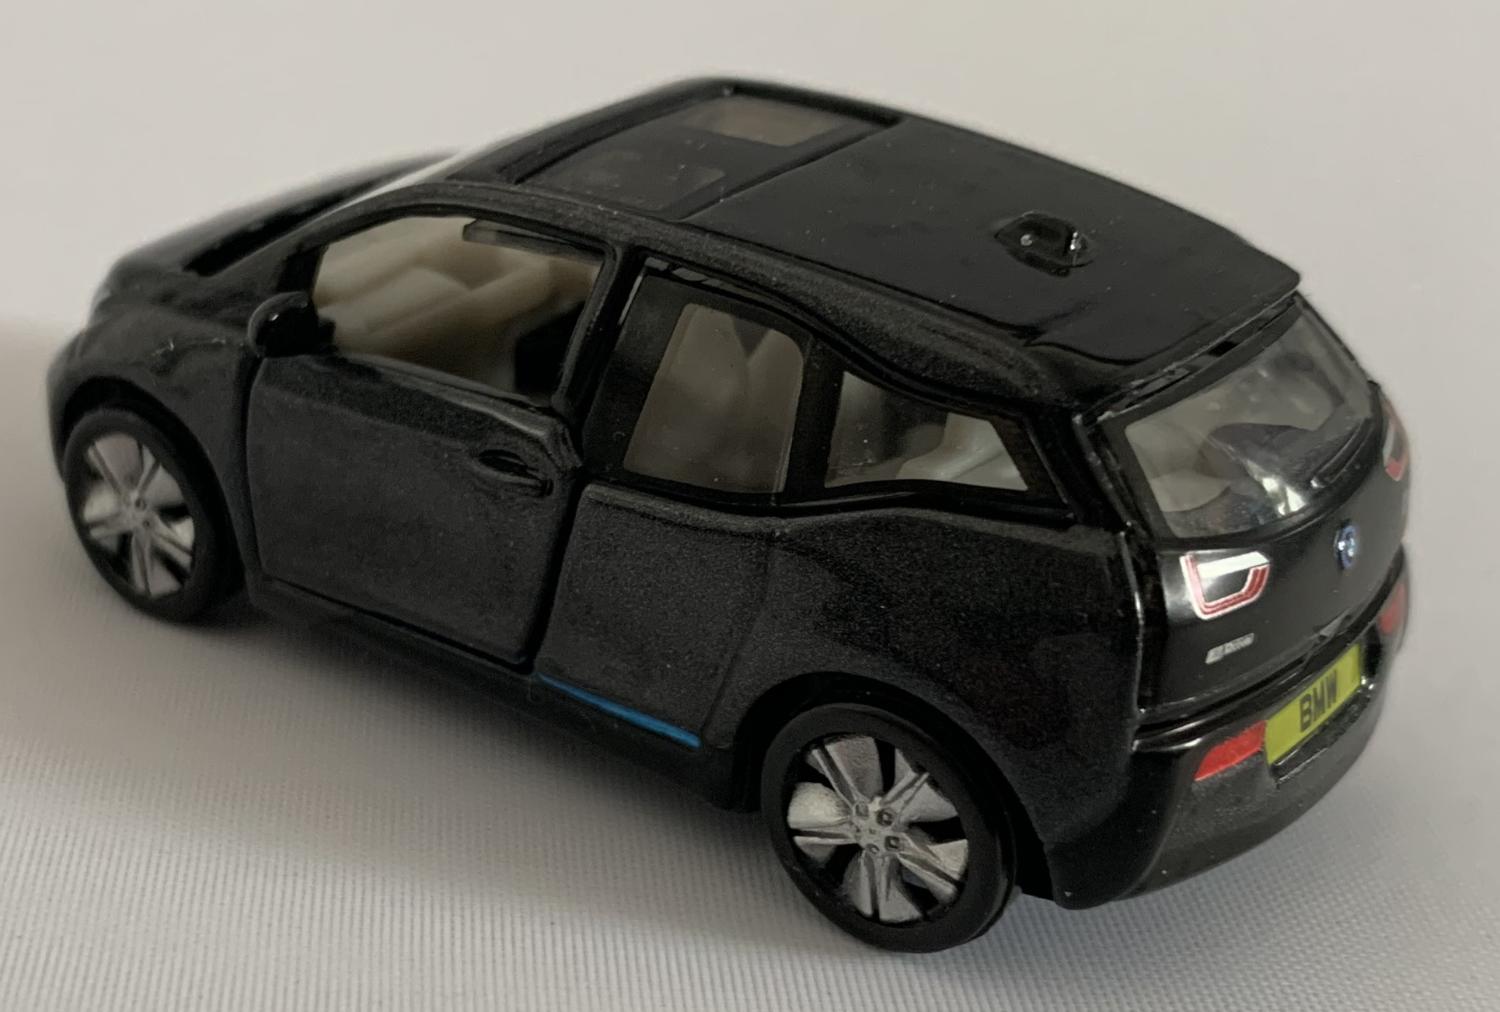 BMW i3 (B39) in mineral grey 1:64 scale model from Tiny